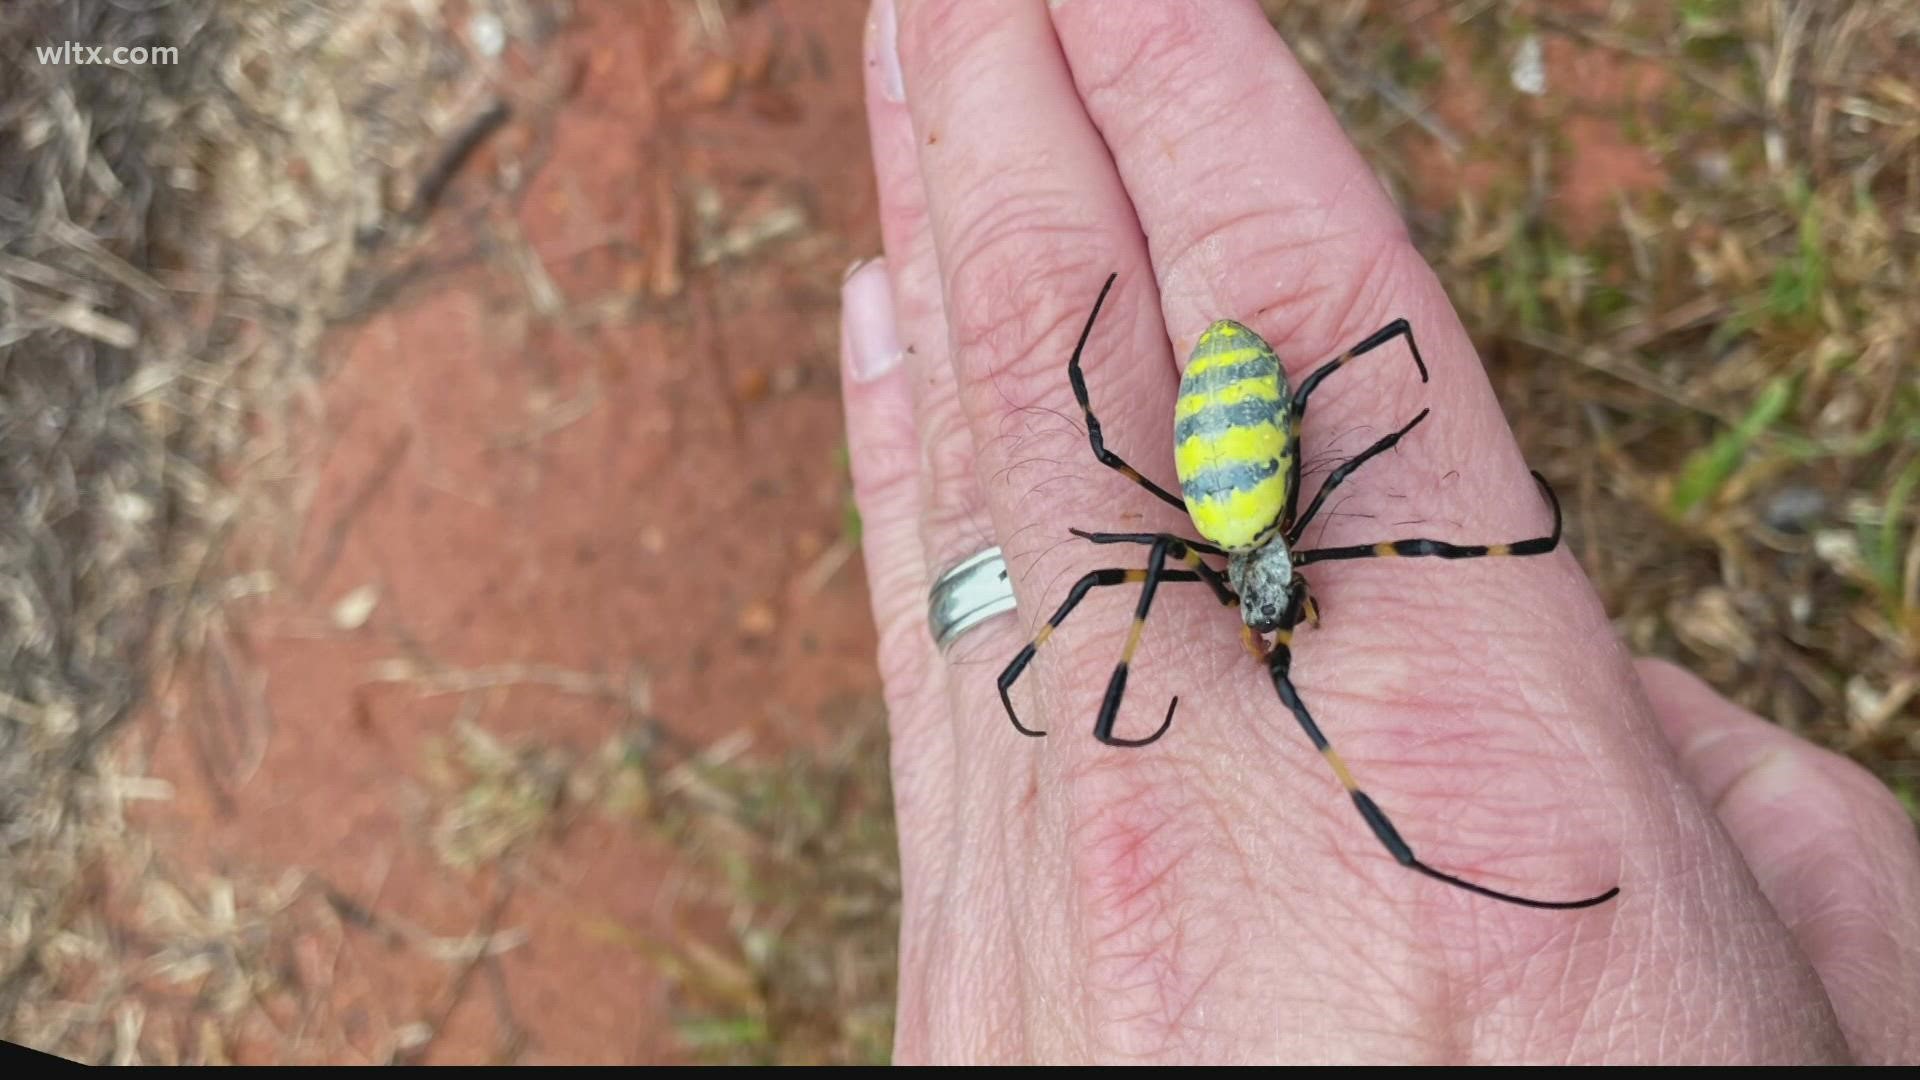 A colorful and large spider originally from Asia.